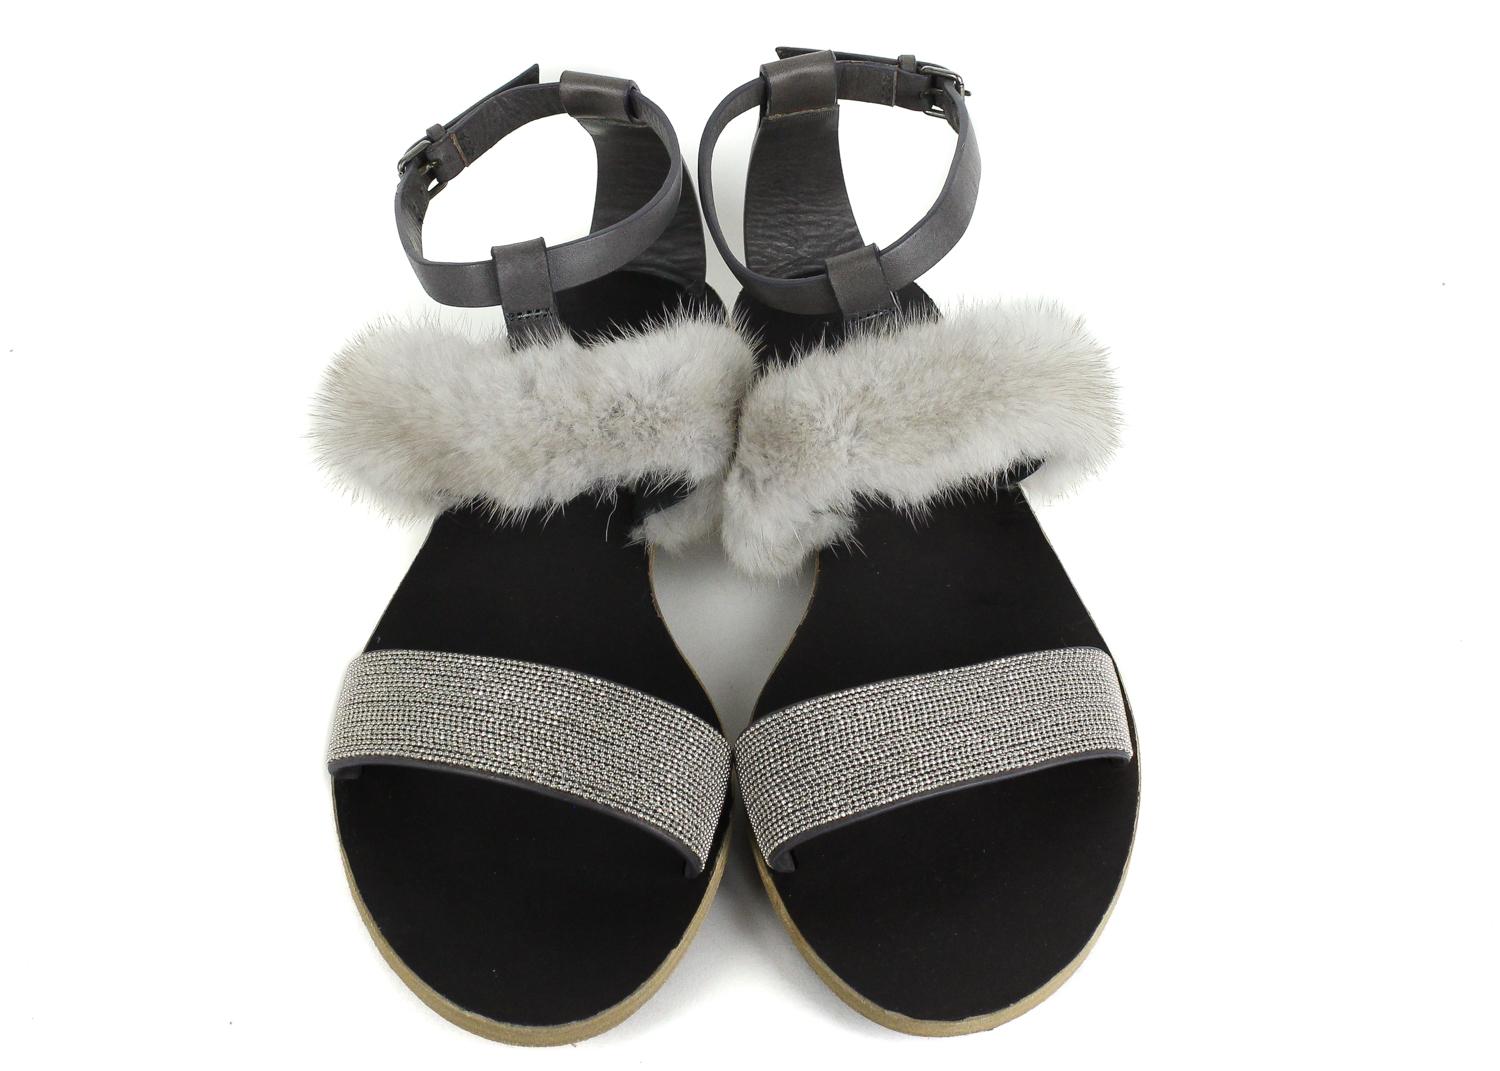 Brunello Cucinelli grey leather flat sandals. These sandals feature a mink fur detailing with an ankle strap buckle fastening. Pair it with a summer dress for a chic everyday look.



Leather
Mink Fur Detailing
Ankle Strap with Buckle